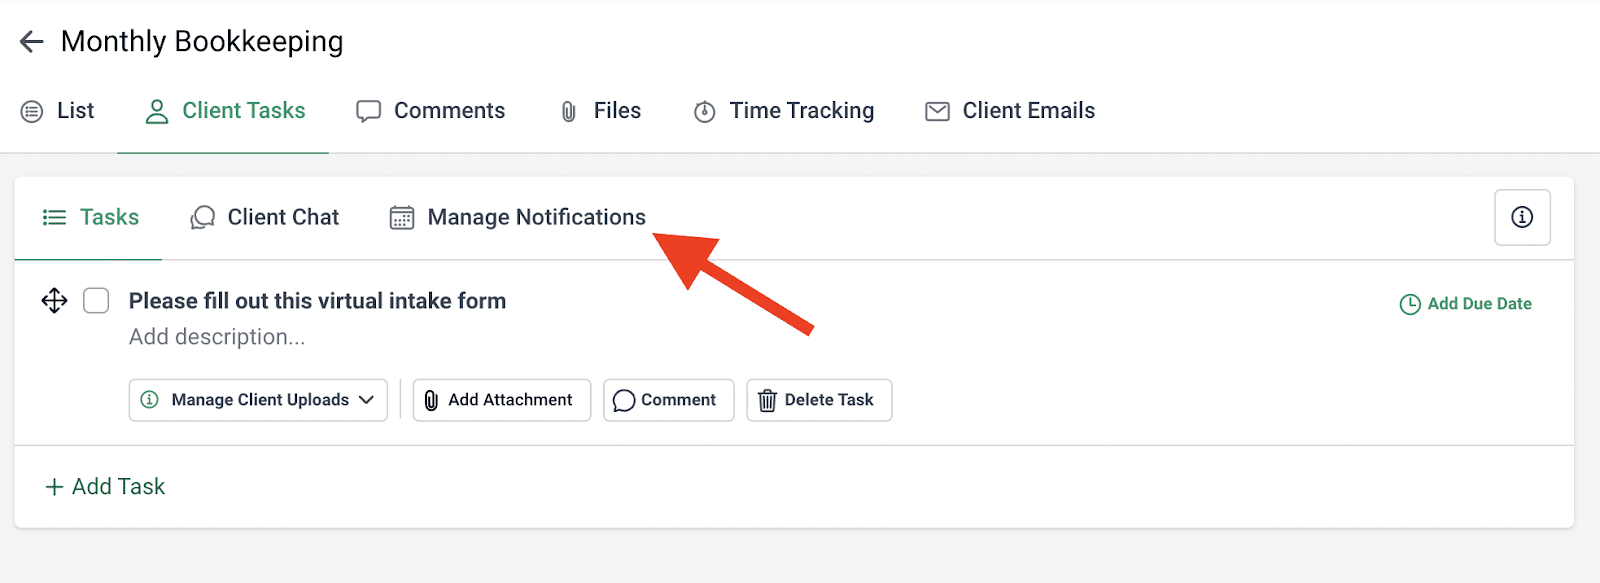 managing client notifications for client tasks